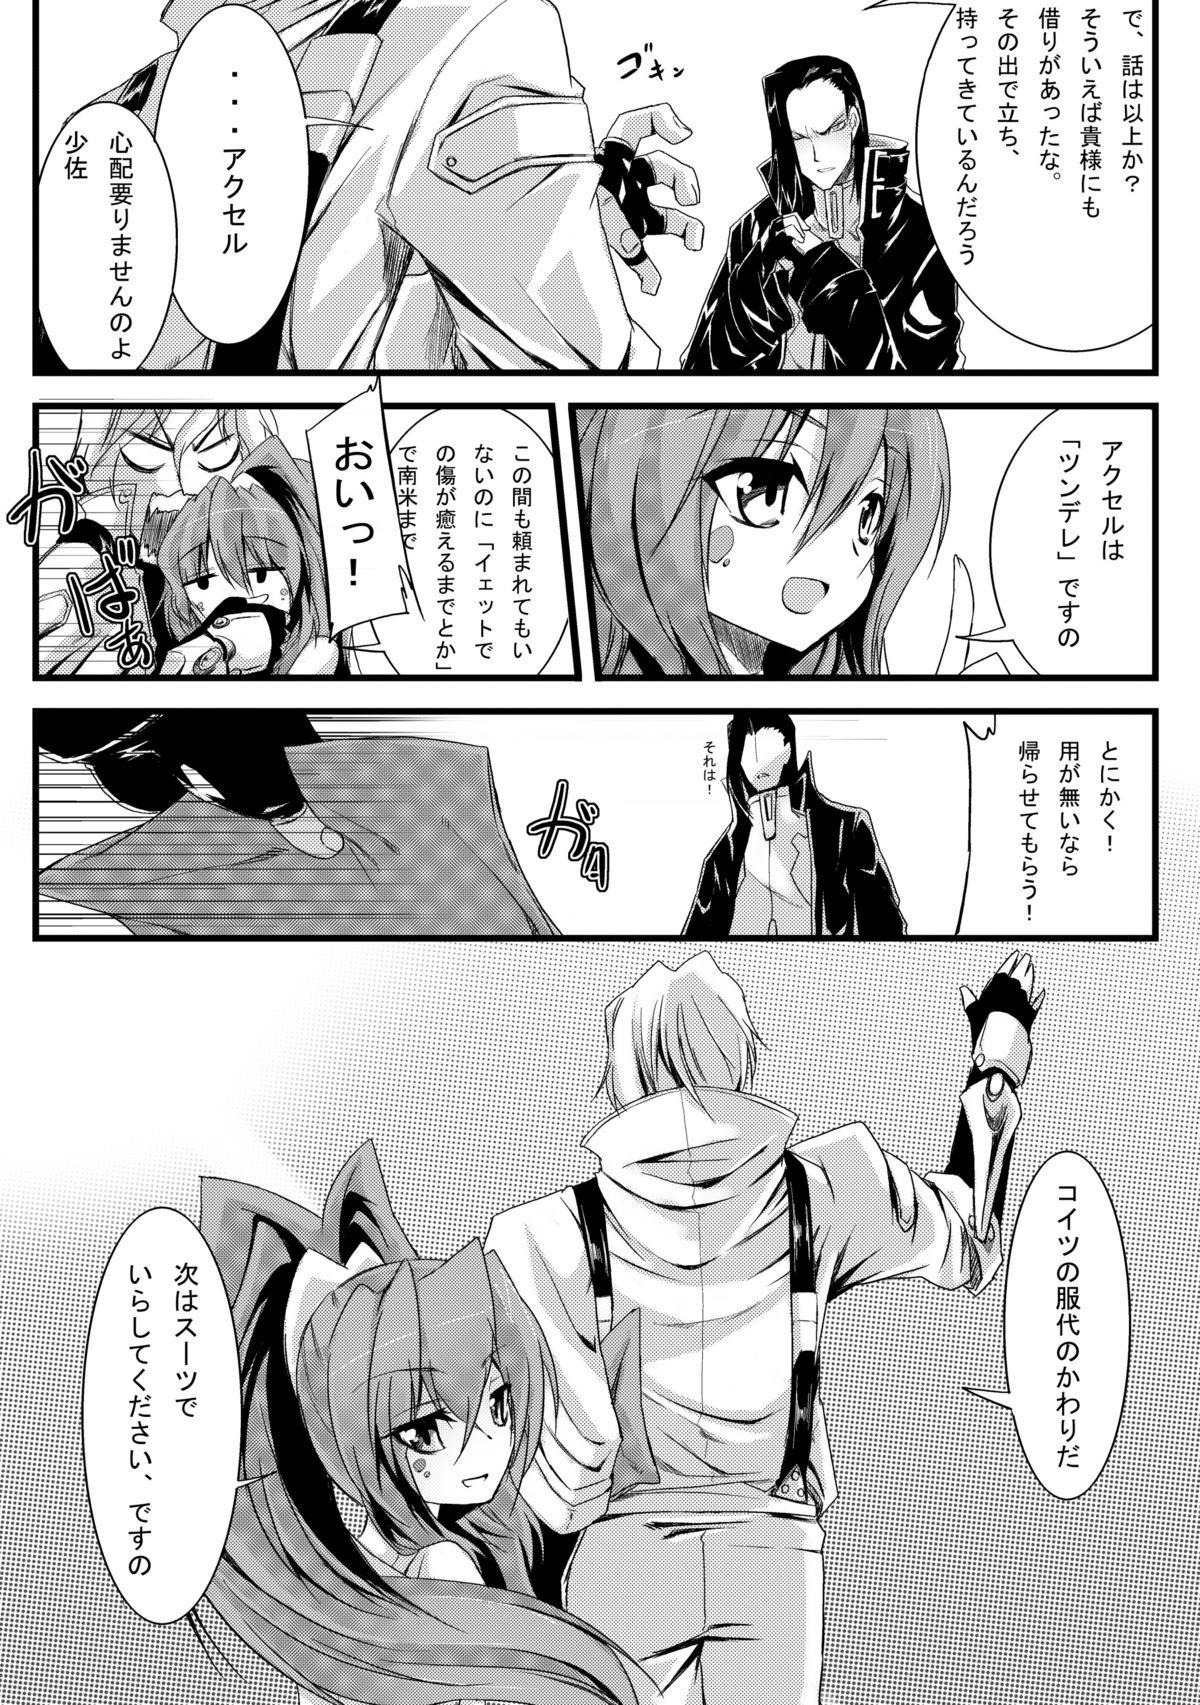 Perverted Alchemie to Issho ! - Super robot wars Public - Page 7